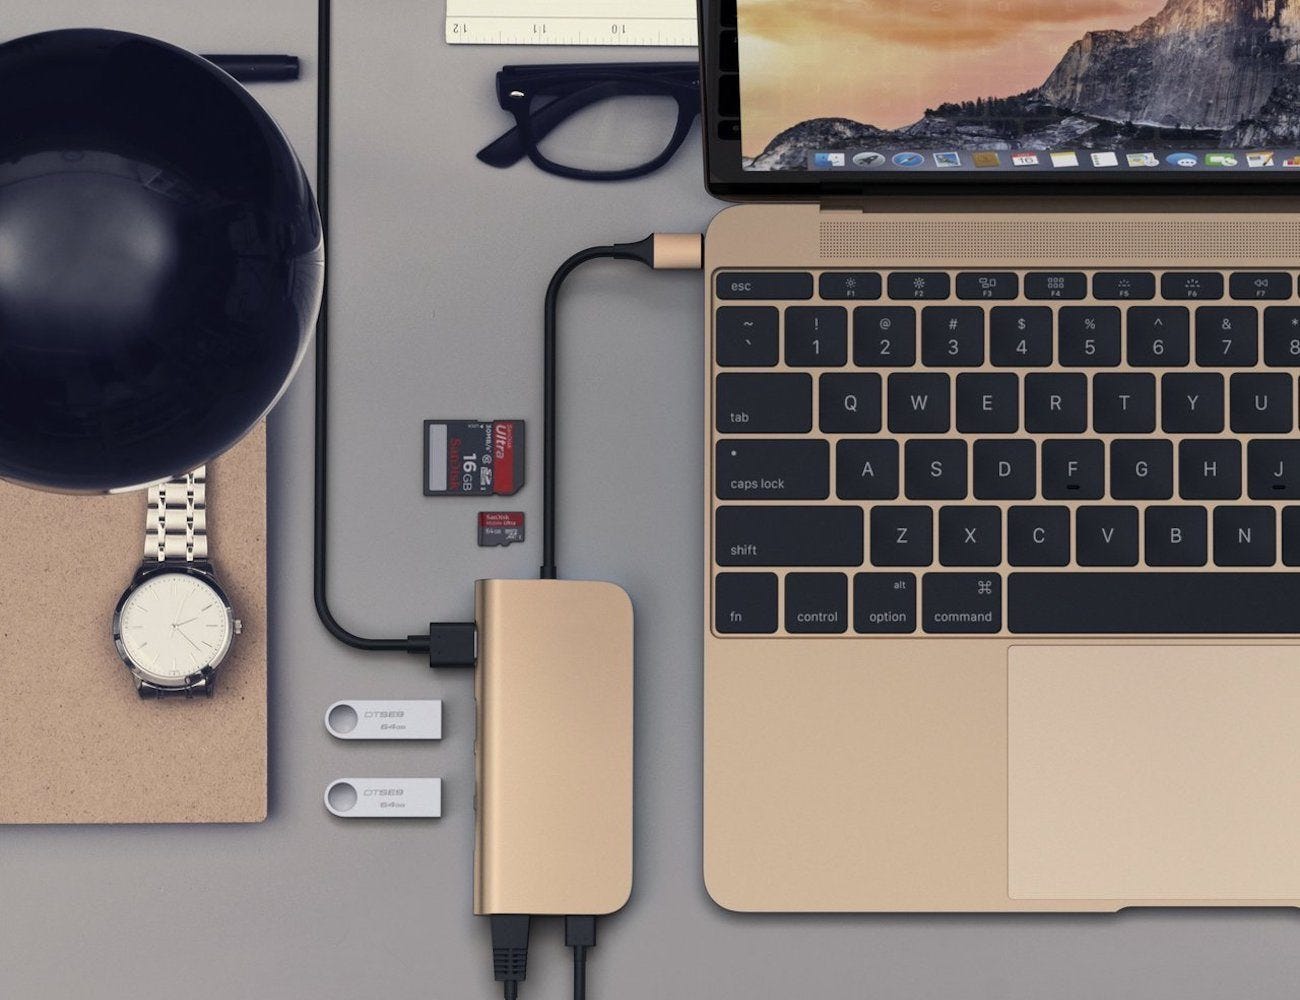 9 Useful gadgets to make you more productive at work » Gadget Flow